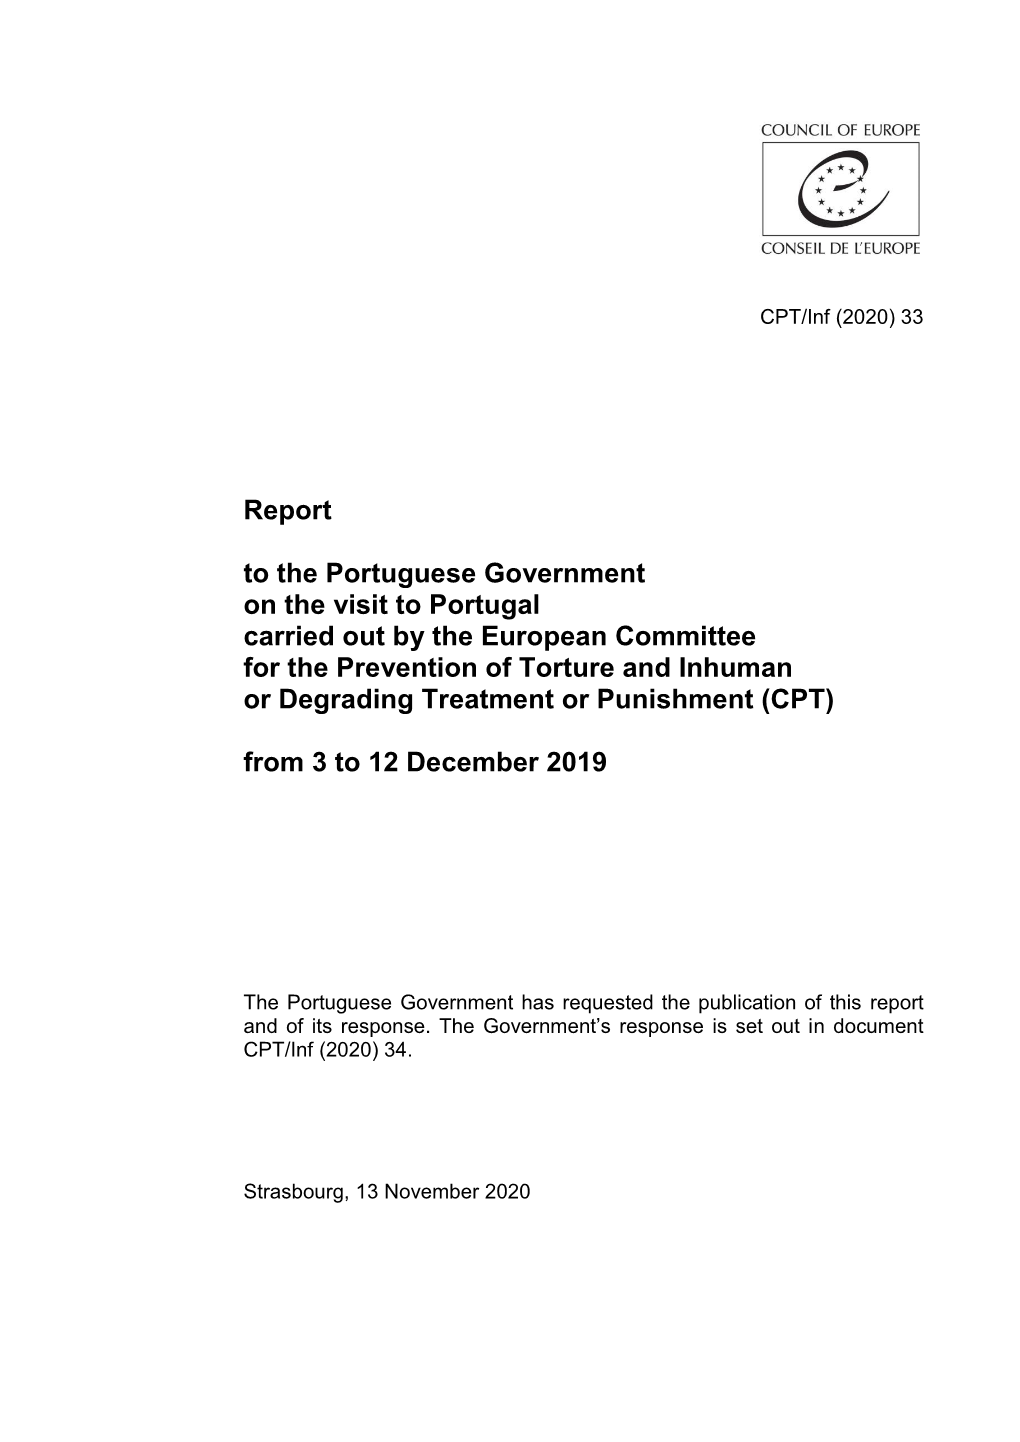 Report to the Portuguese Government on the Visit to Portugal Carried